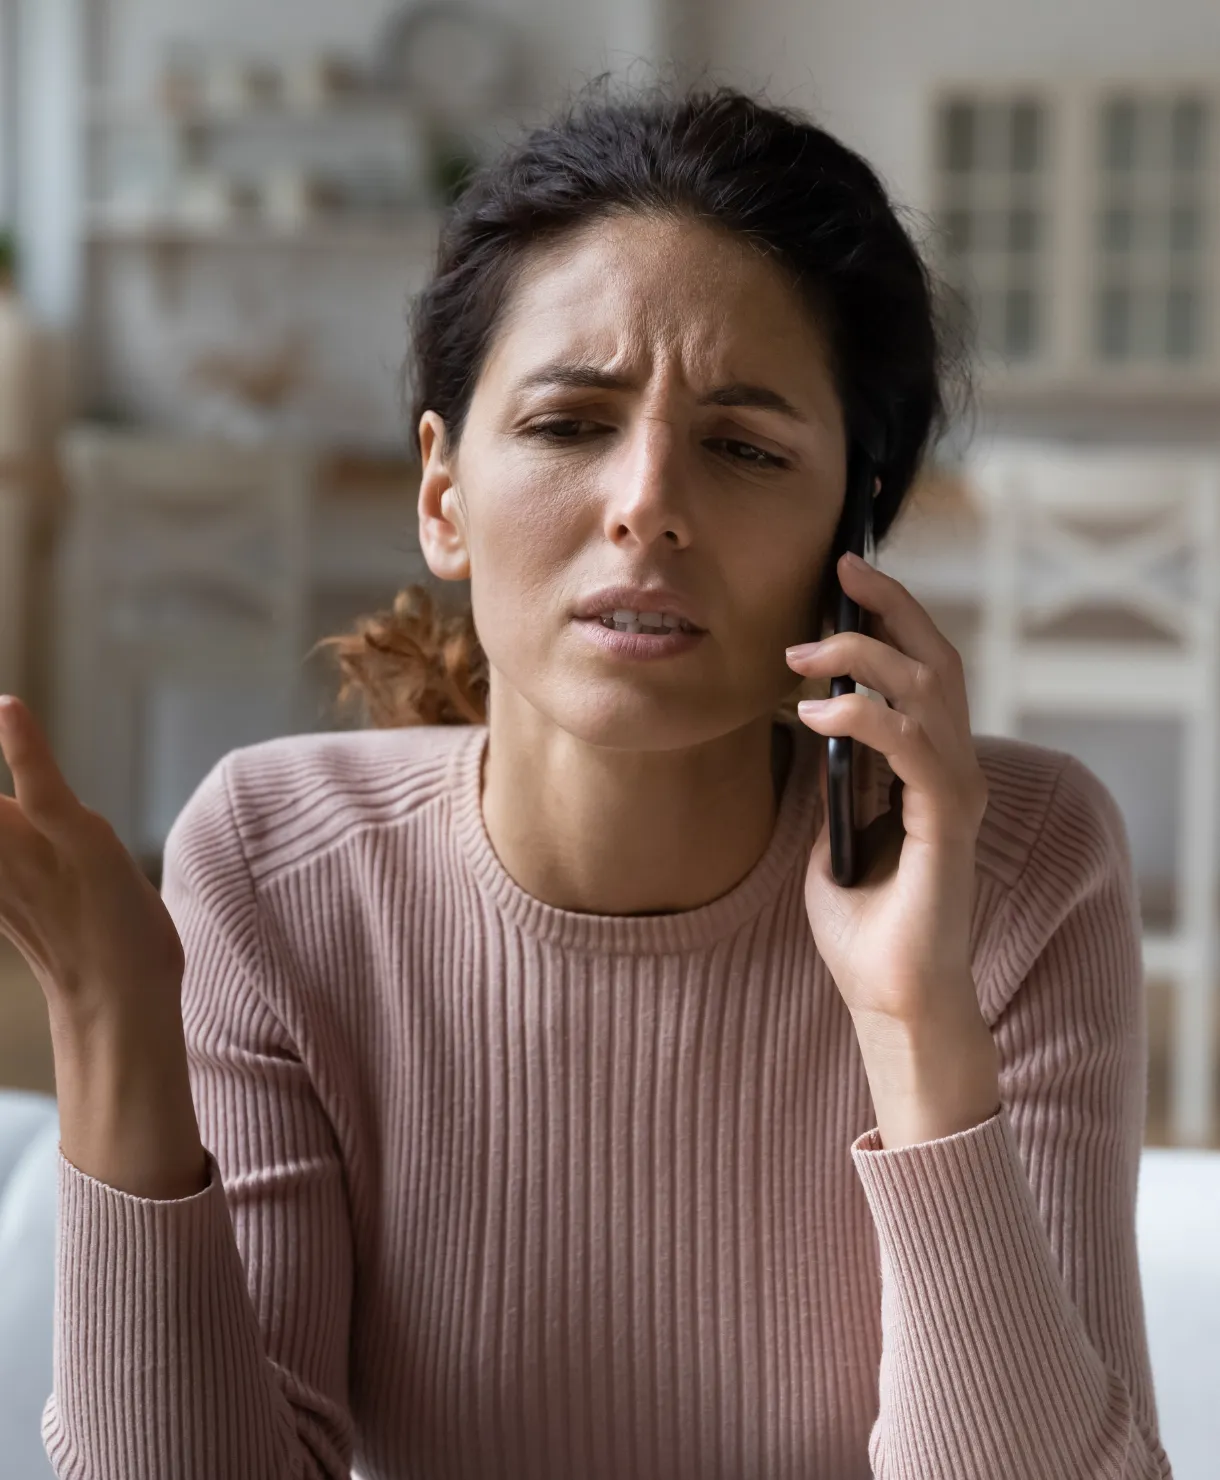 Woman talking on the phone looking frustrated